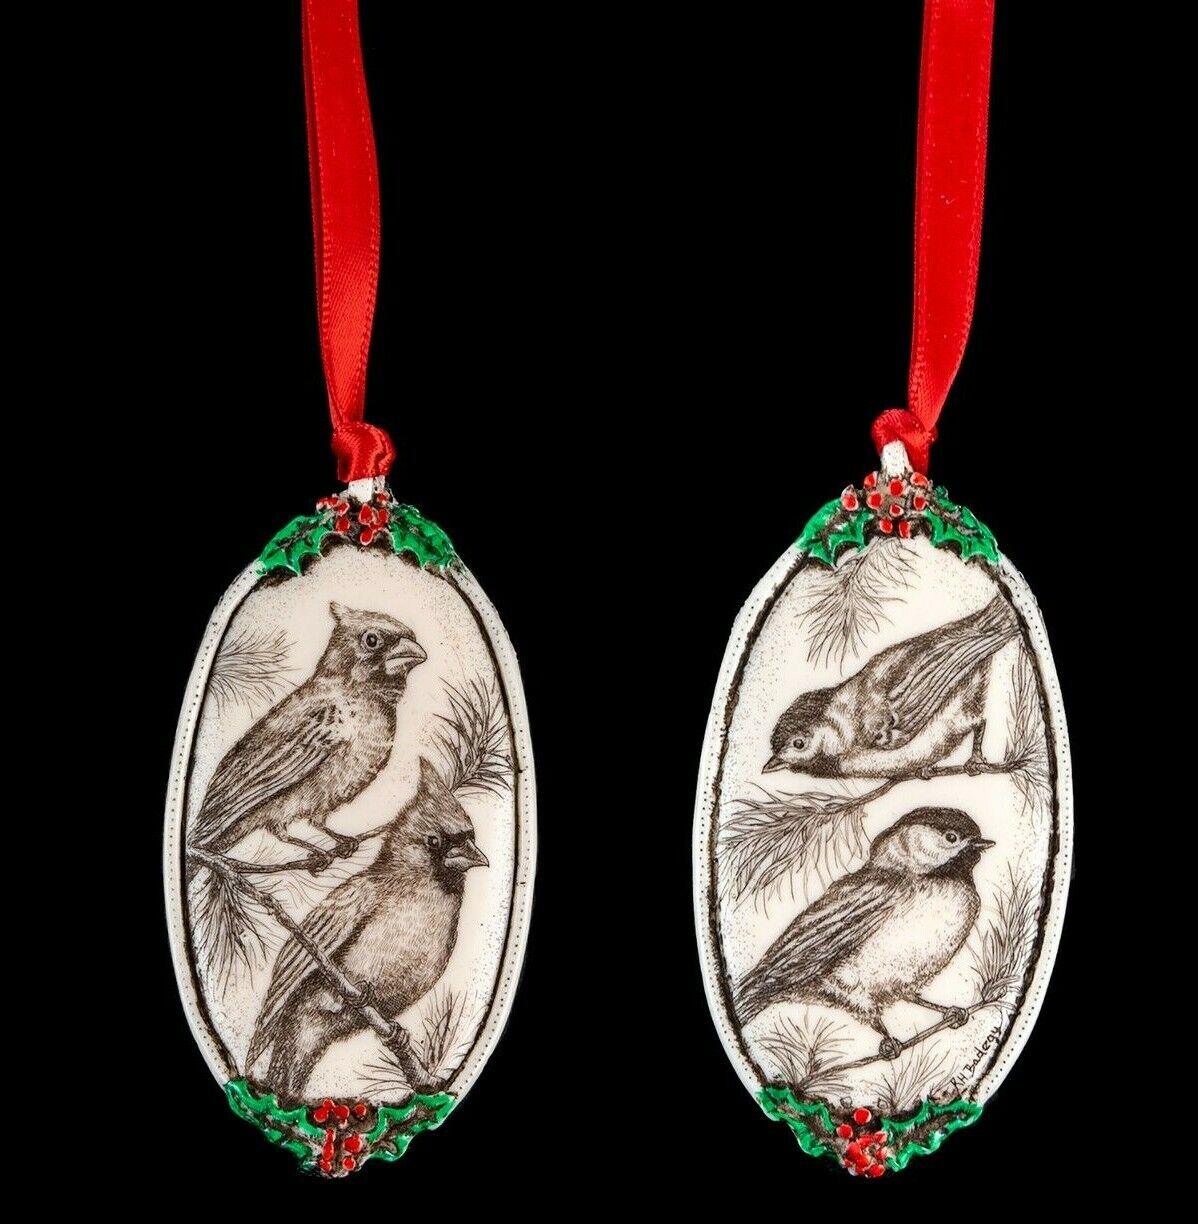 Double Sided Bird Ornament. Moosup Valley, Rachel Badeau,Etched, Cardinal, Robin